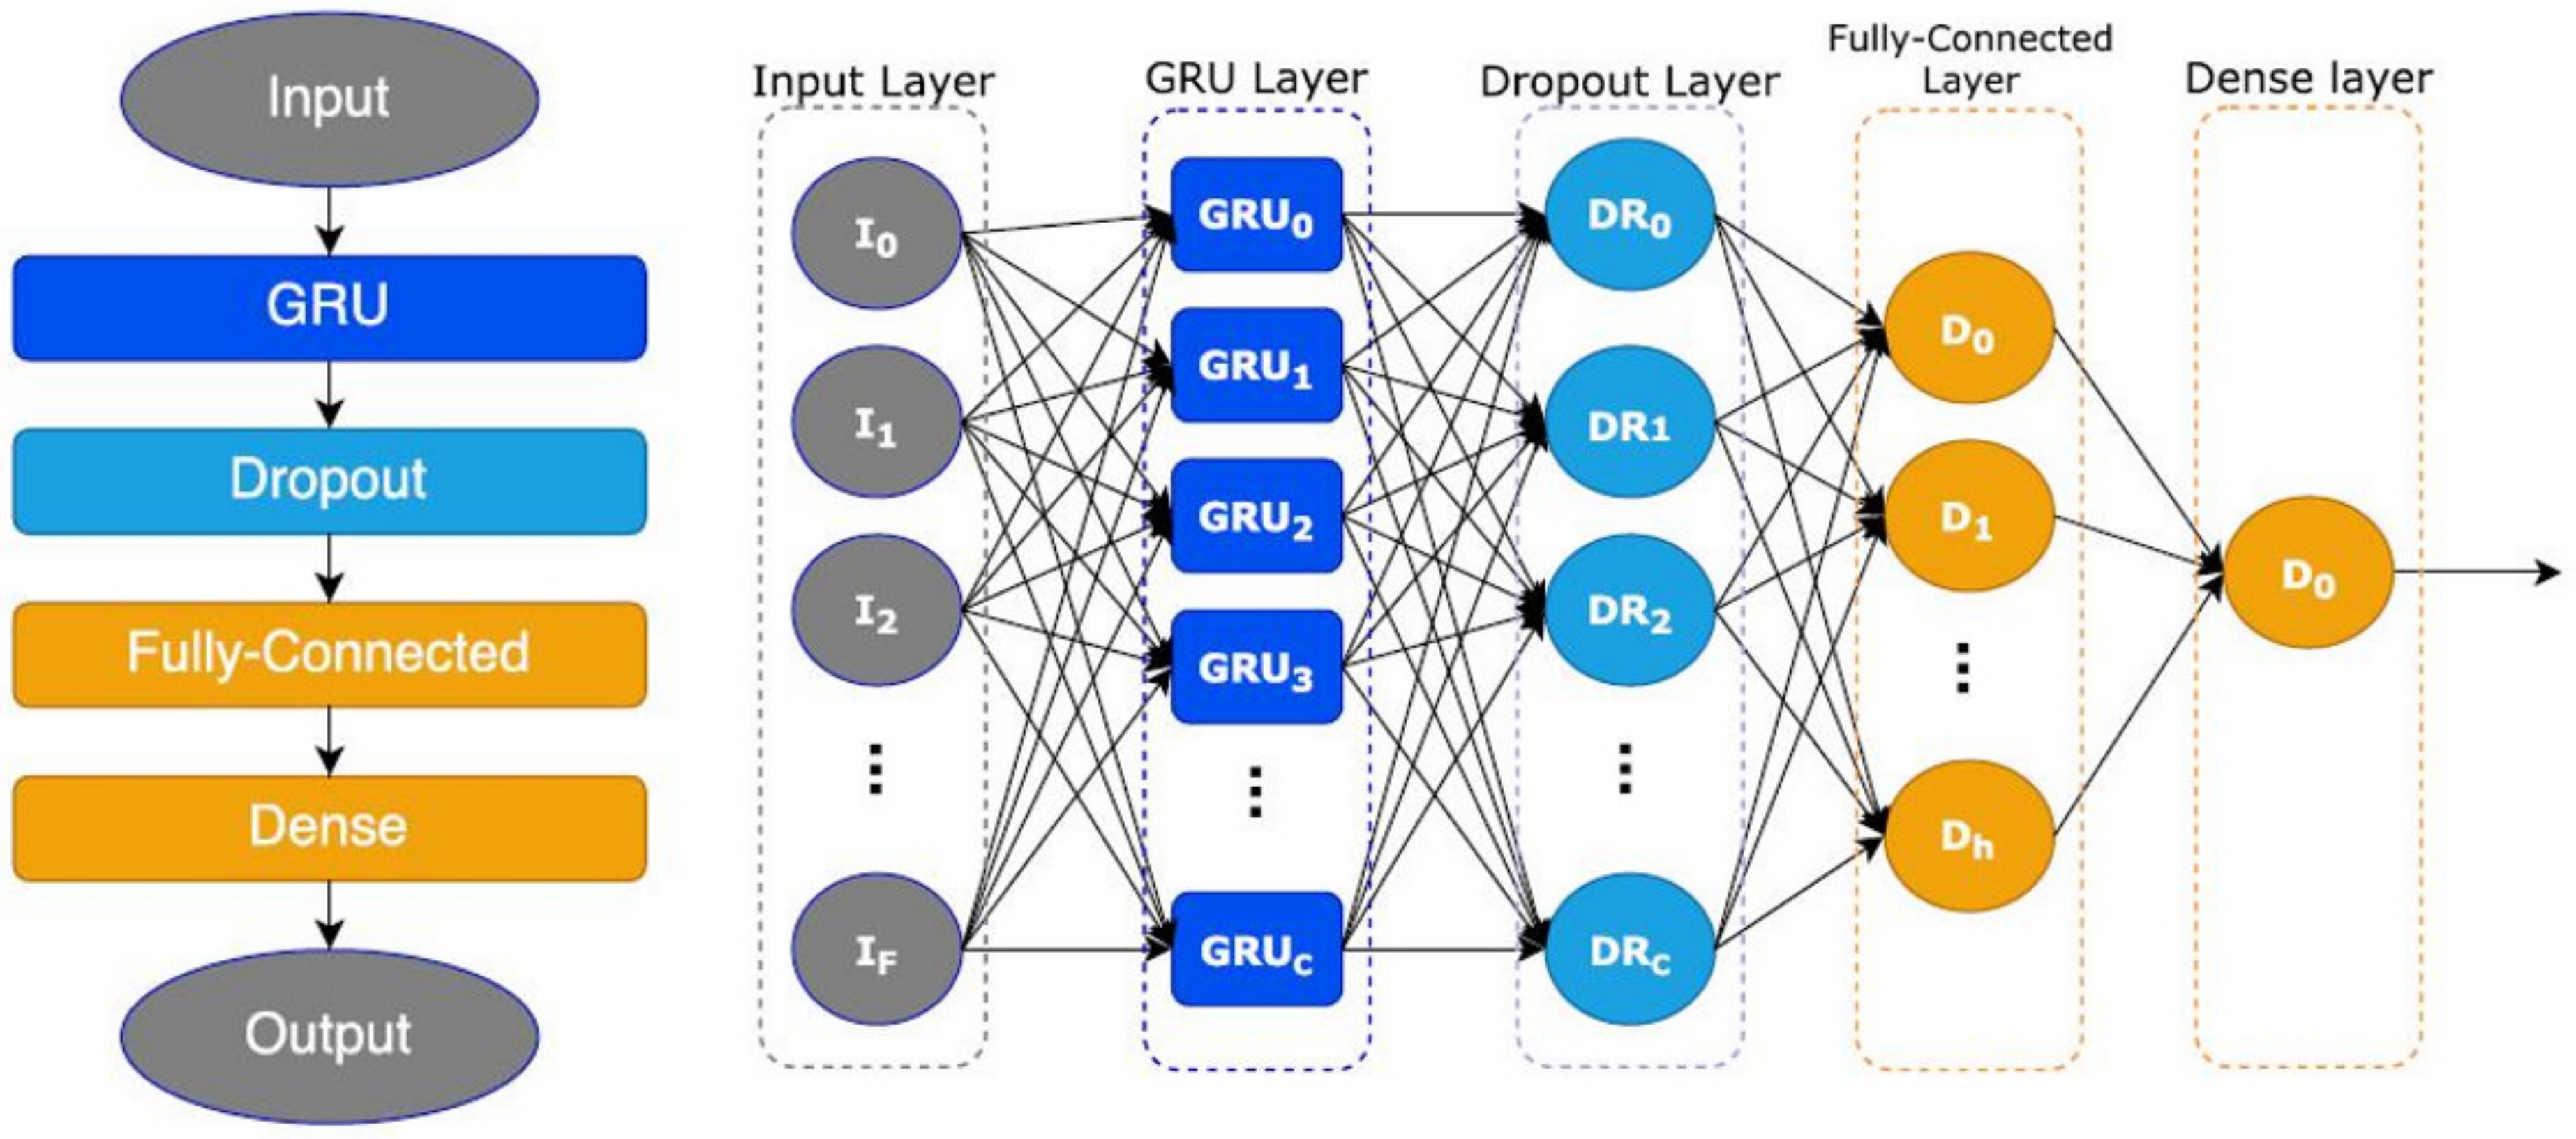 Hybrid deeper neural network model for detection of the Domain Name System  over Hypertext markup language protocol traffic flooding attacks